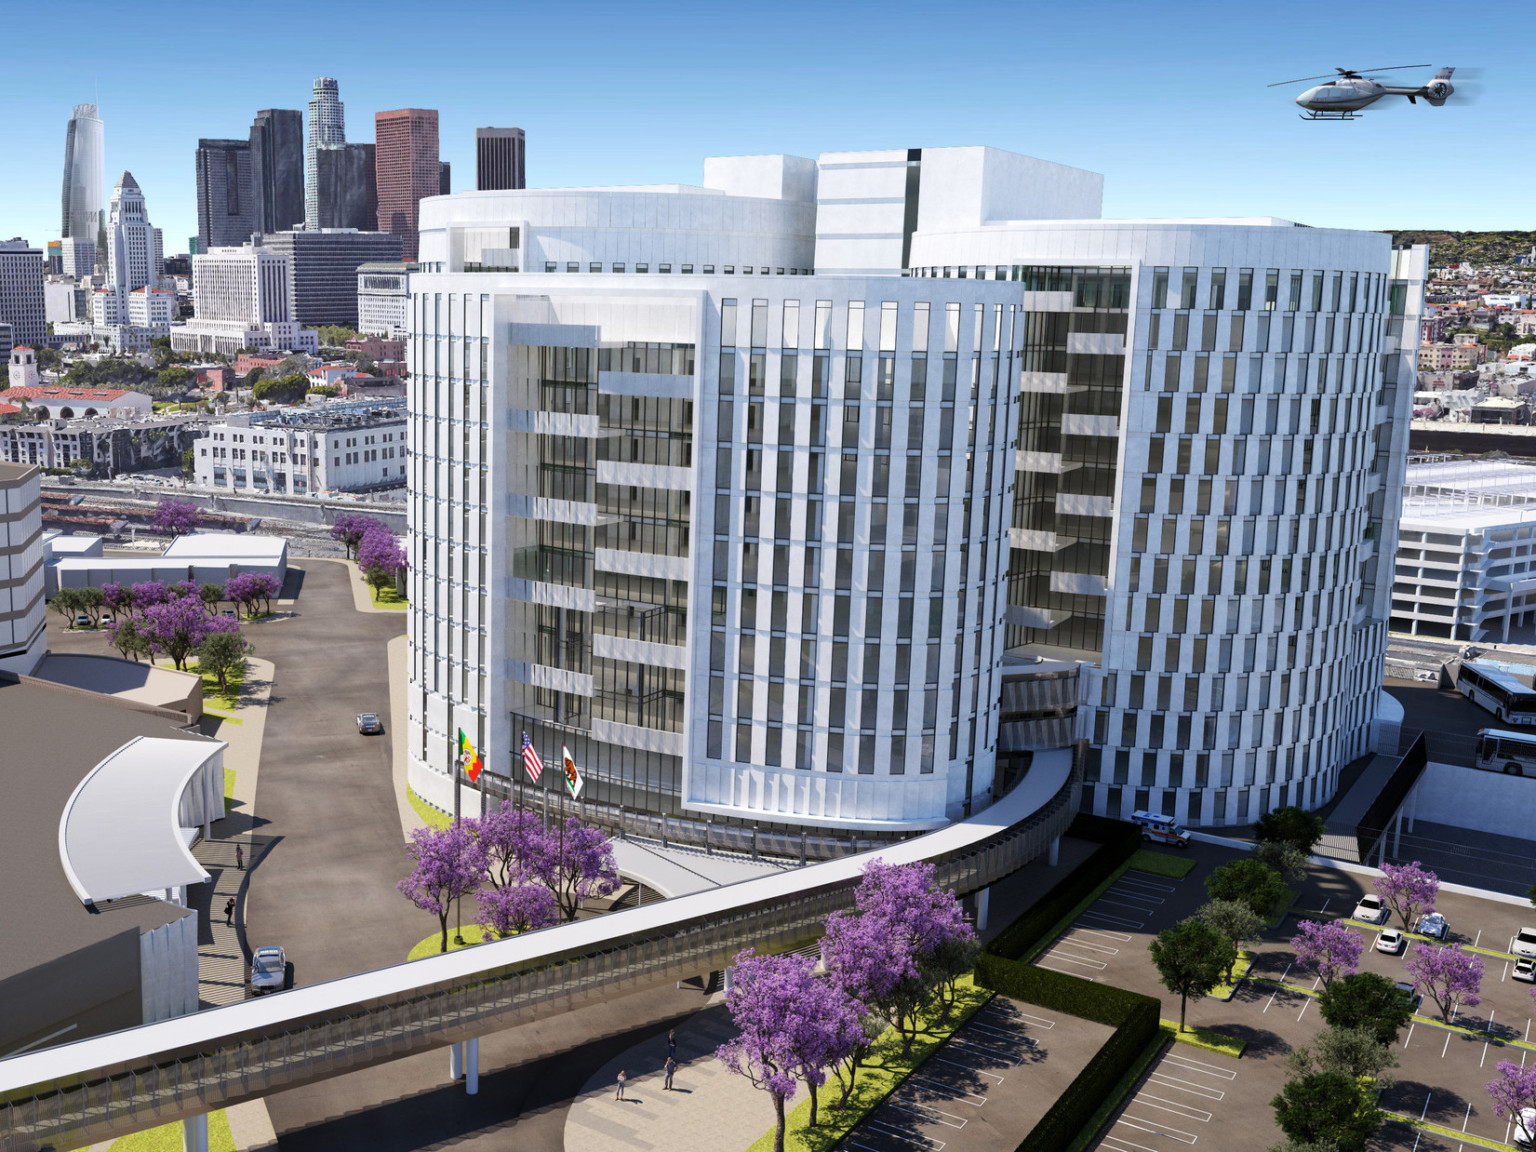 Closer view of color rendering of the white building in front of the Los Angeles skyline. A helicopter is flying to the right